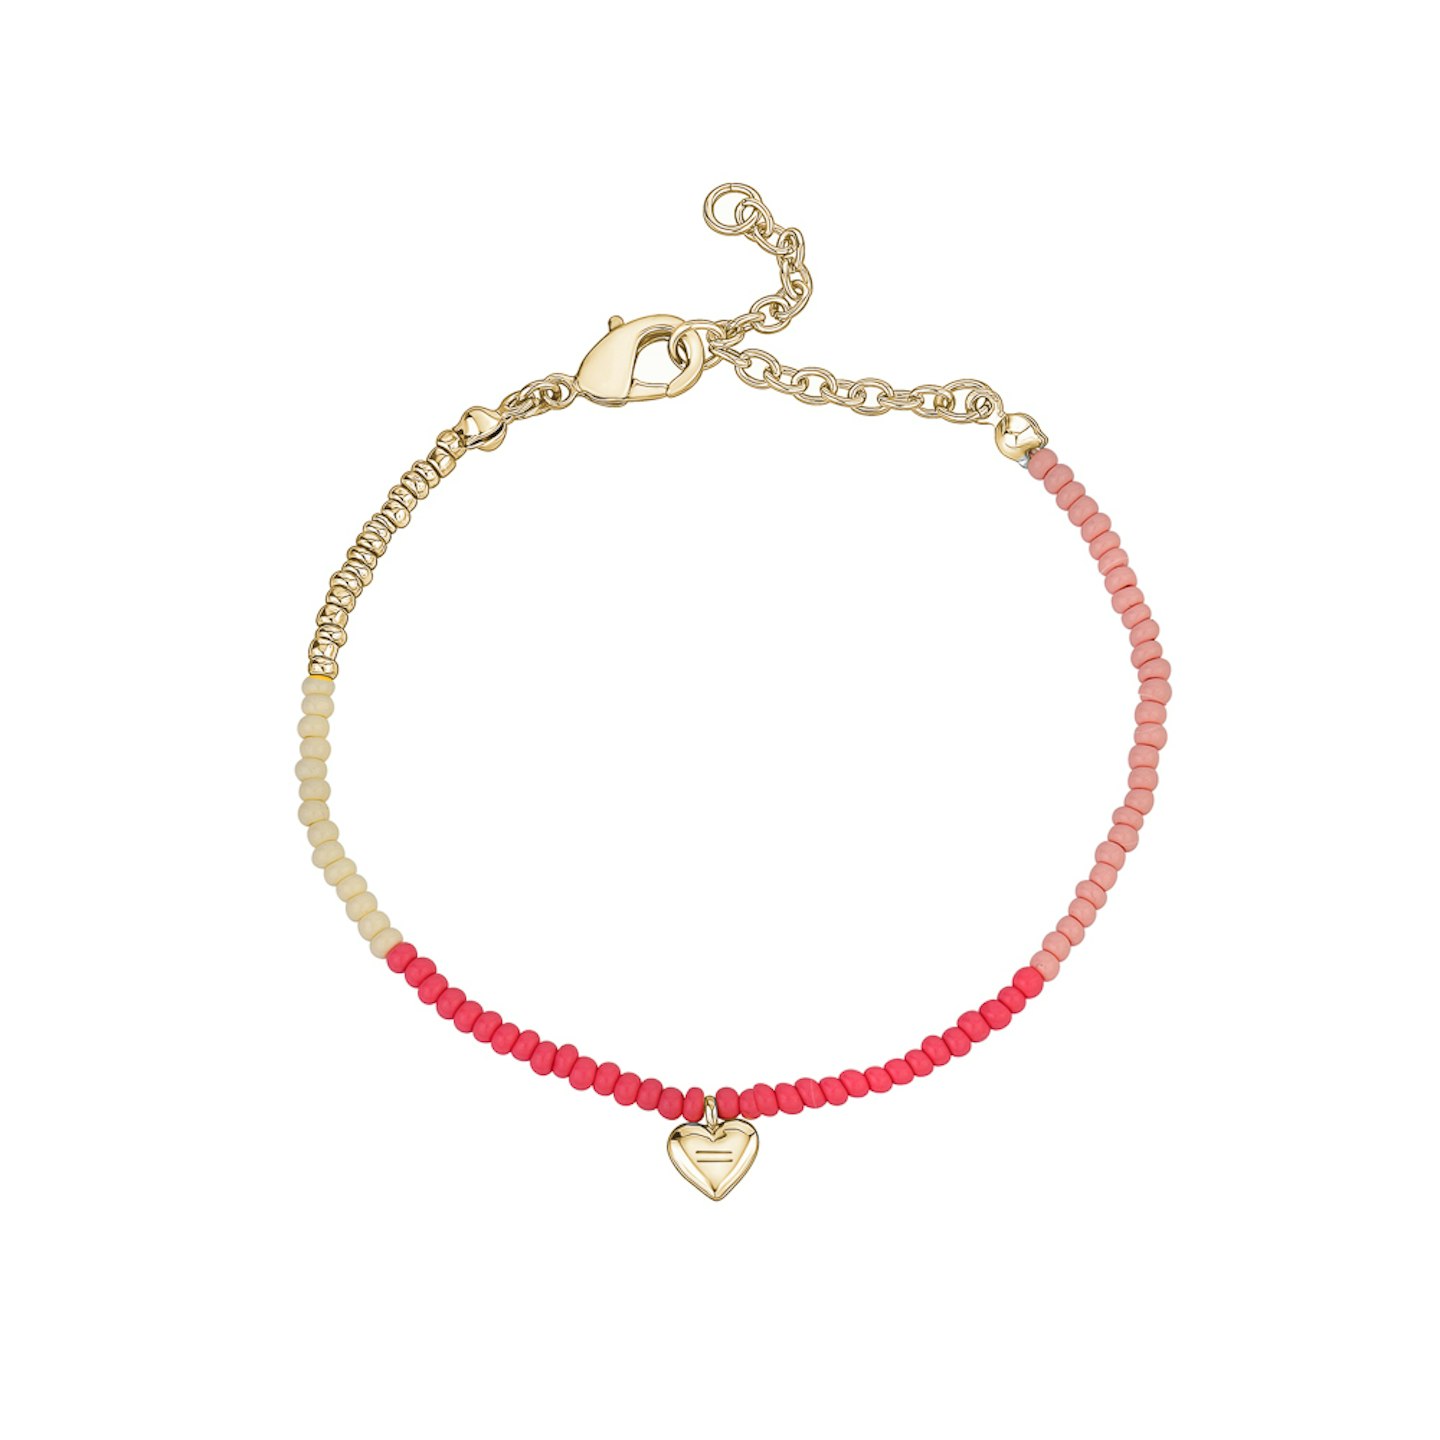 With Love Darling, GLOBAL GOAL # 5: EQUALITY HEART BEADED BRACELET, £35